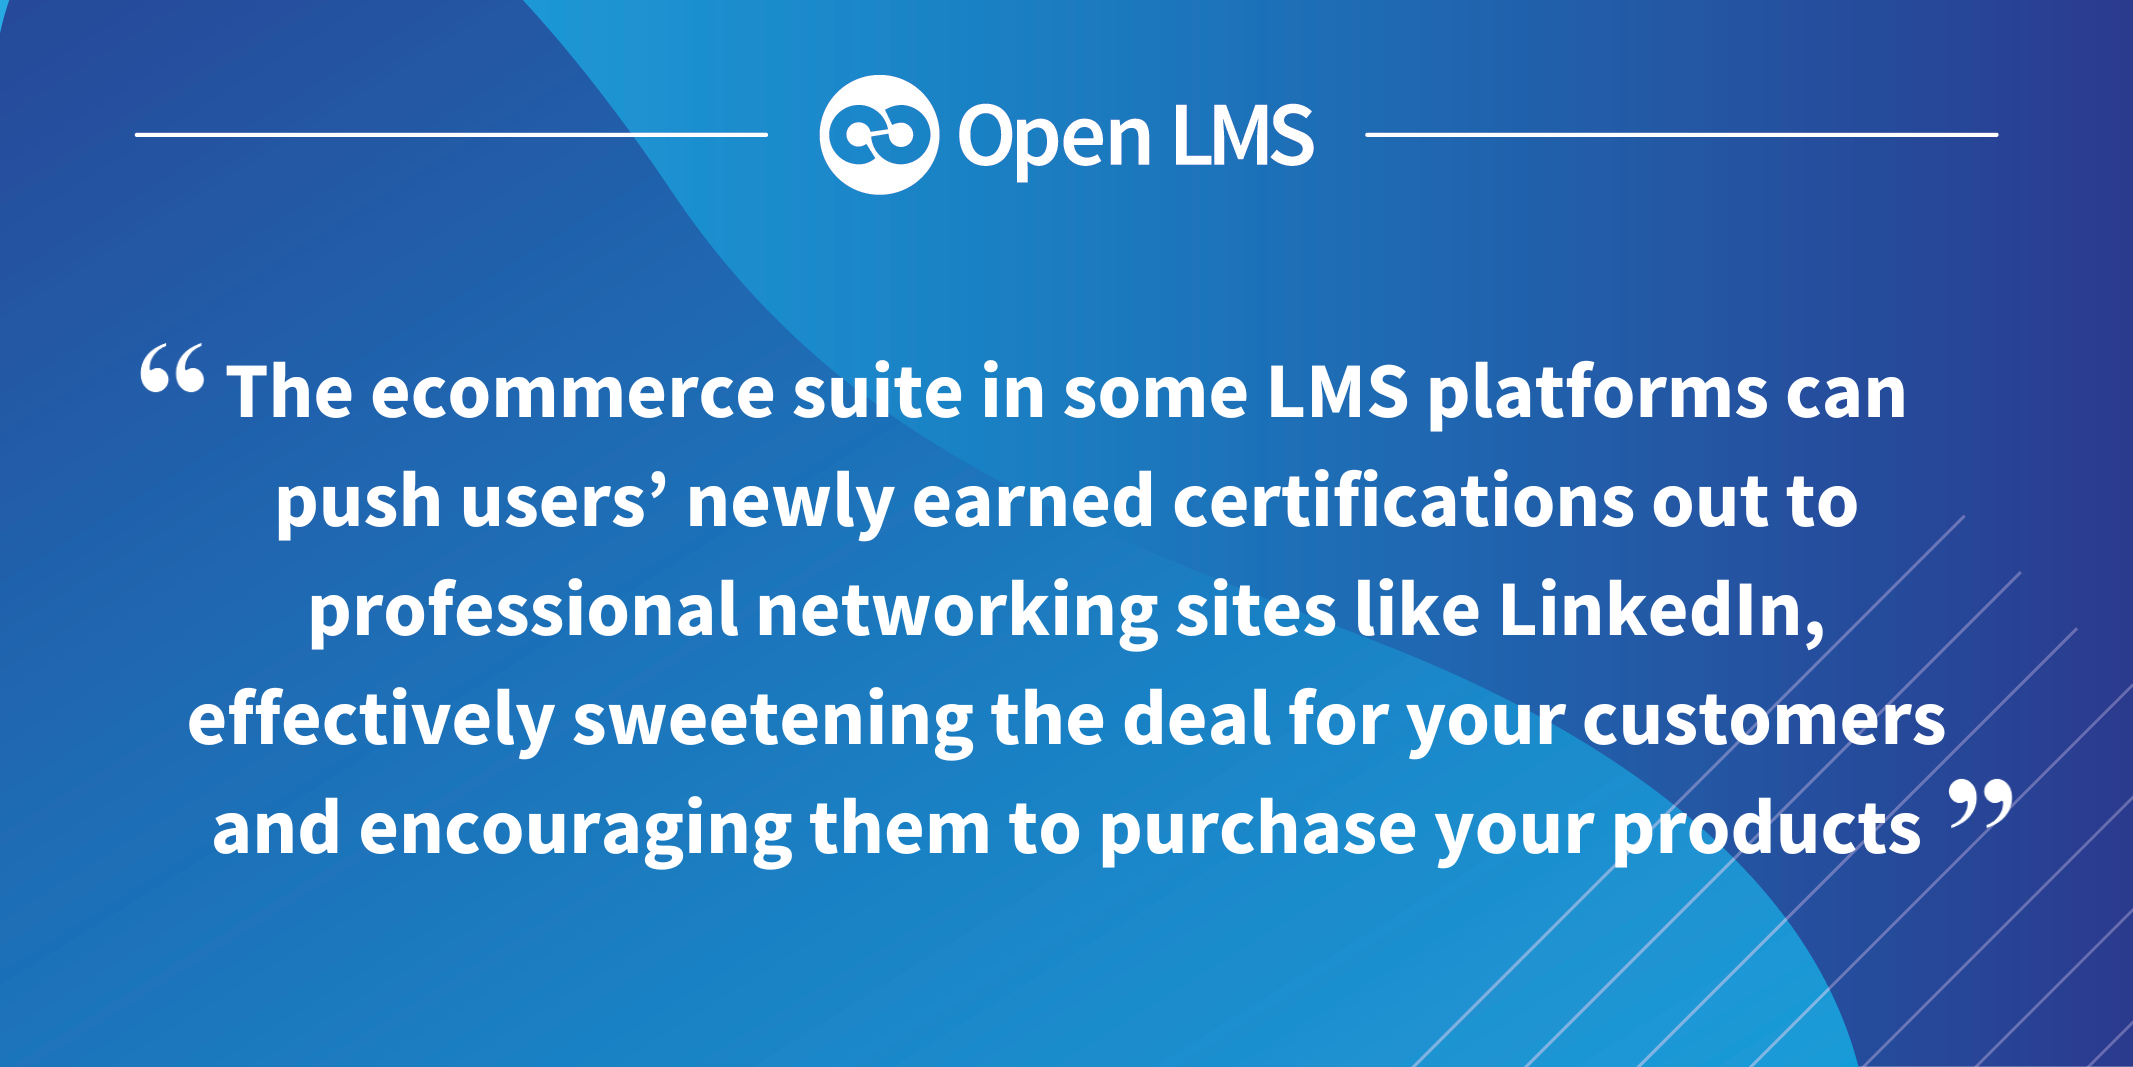 The ecommerce suite in some LMS platforms can push users’ newly earned certifications out to professional networking sites like LinkedIn, effectively sweetening the deal for your customers and encouraging them to purchase your products